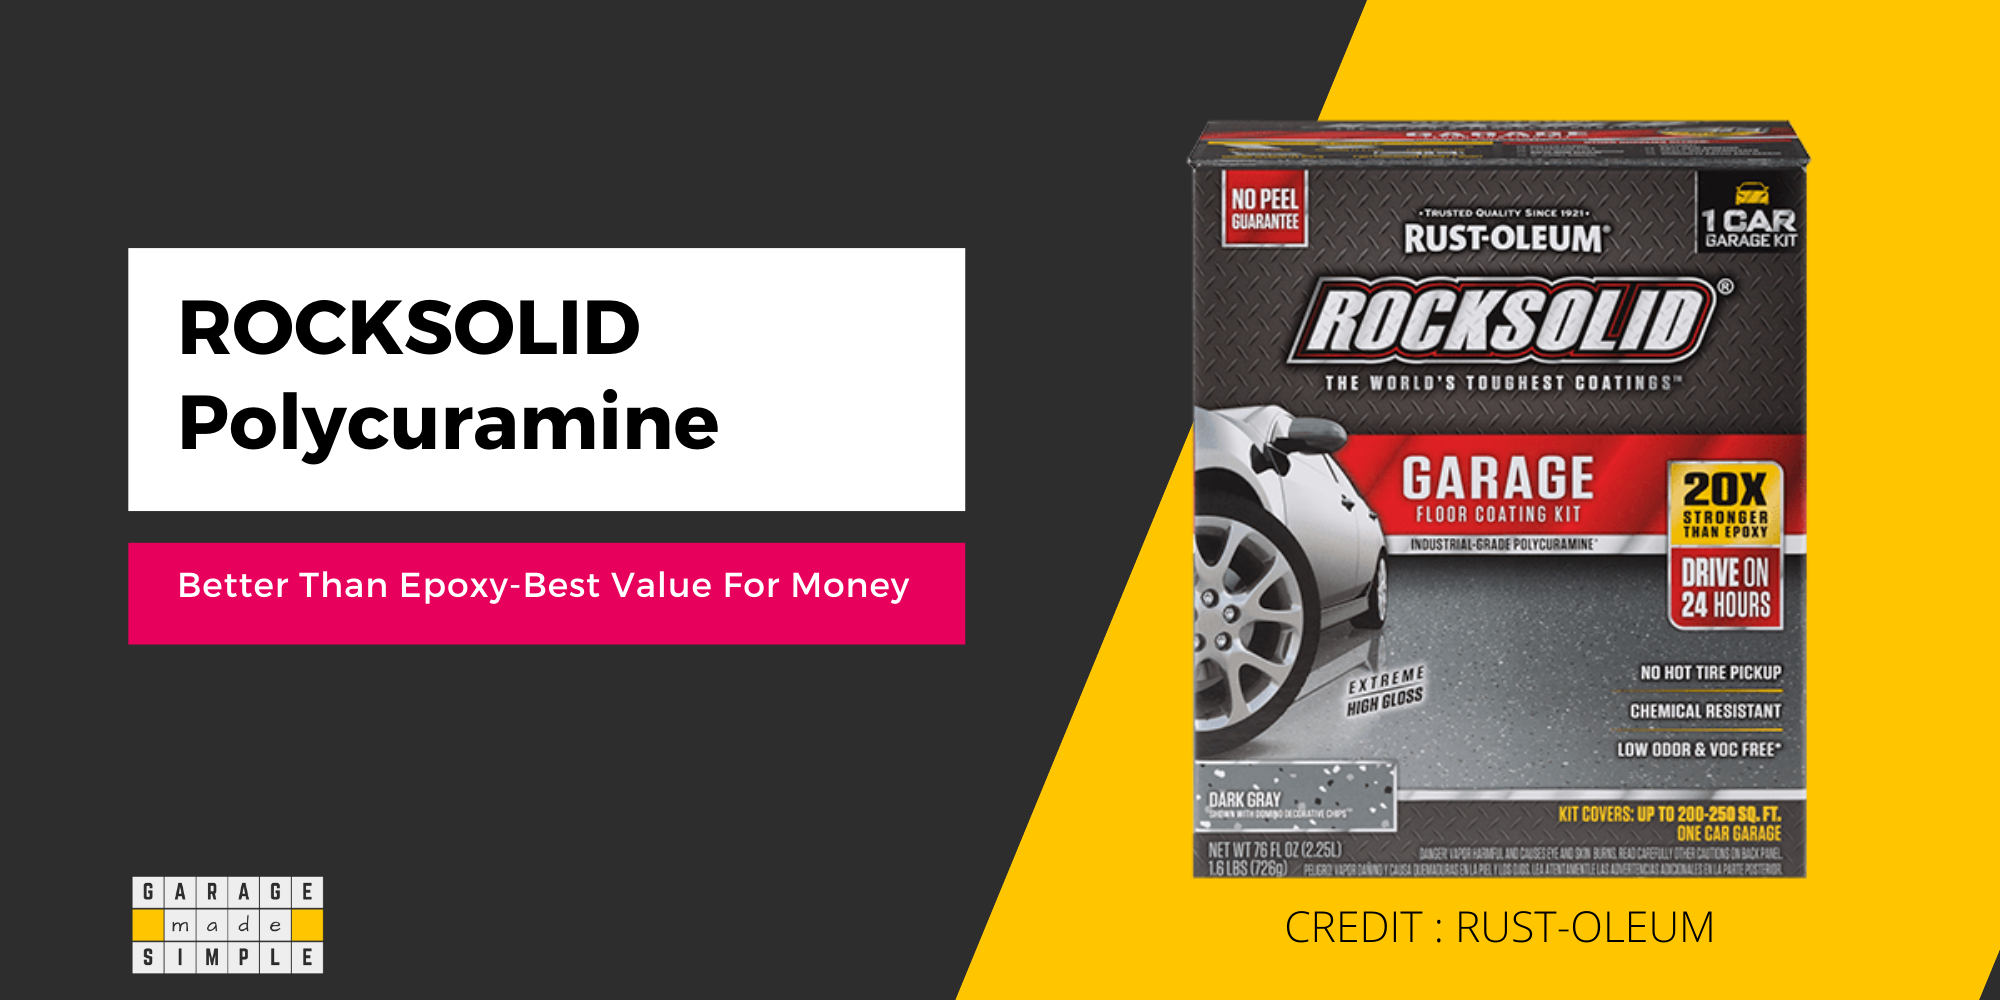 RockSolid Polycuramine Is Better Than Epoxy & Best Value for Money